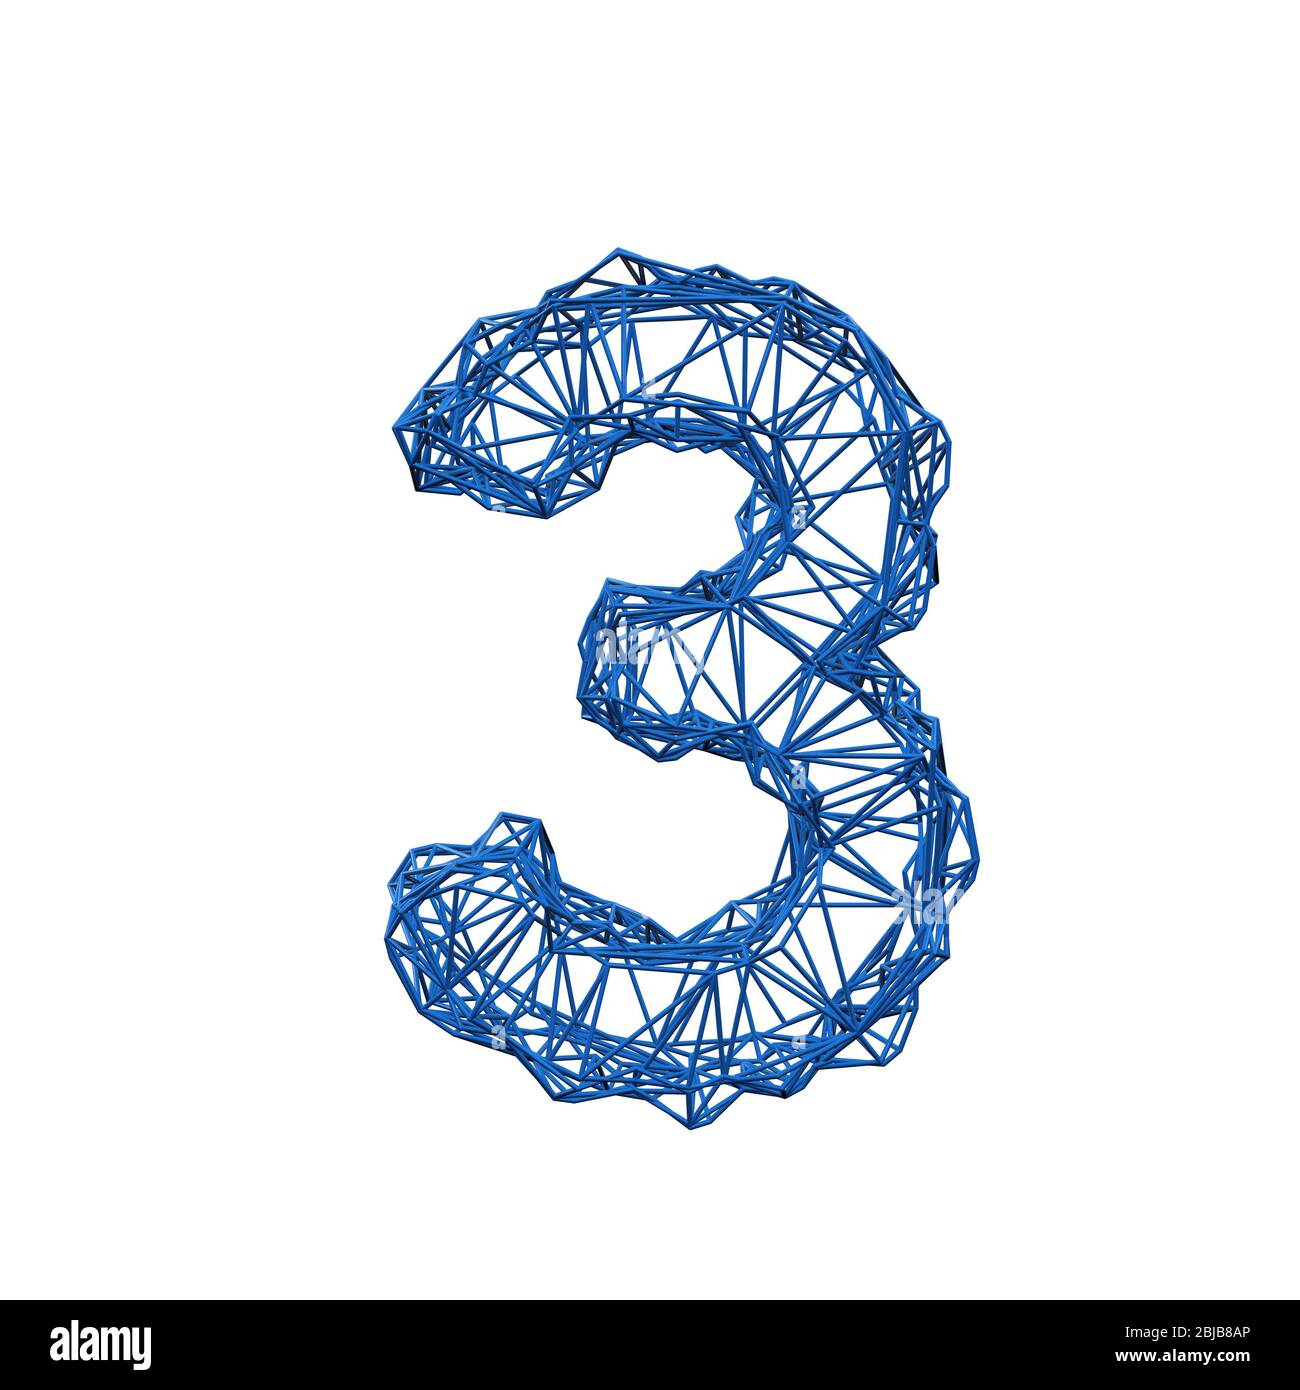 Number 3 Blue 3d Sign Icon Stock Photo - Download Image Now